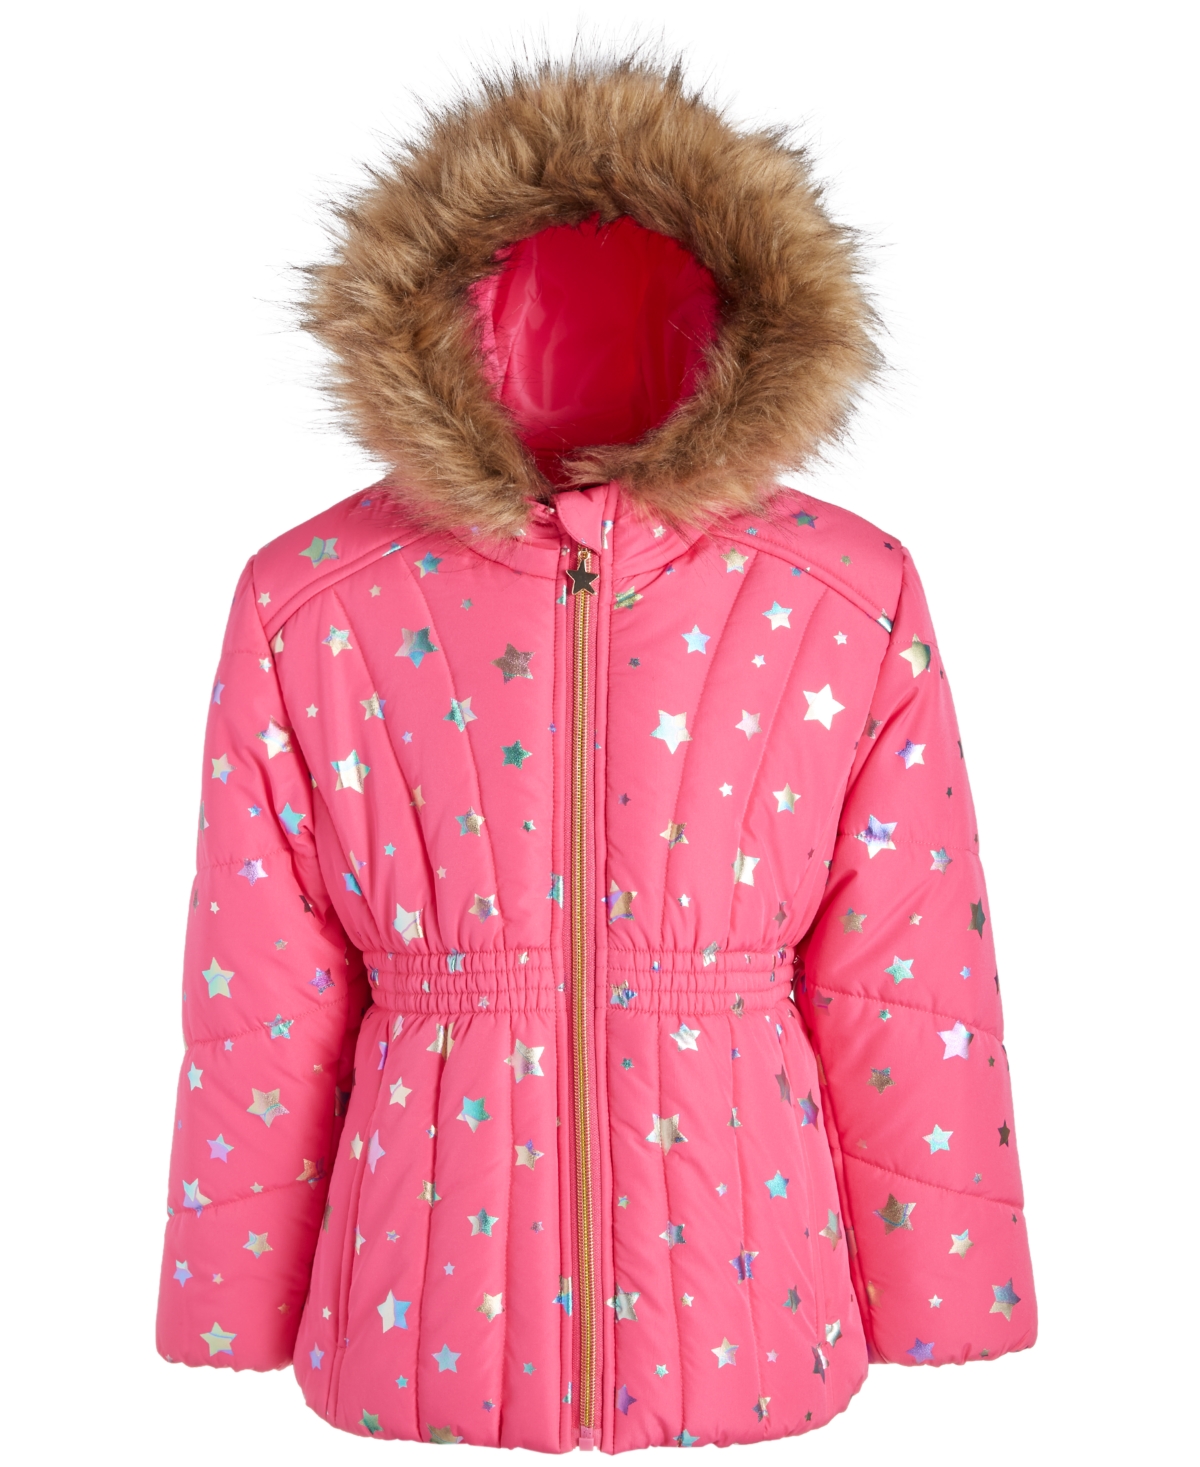 S Rothschild & Co Toddler Foiled Quilted Puffed Jacket In Berry Stars